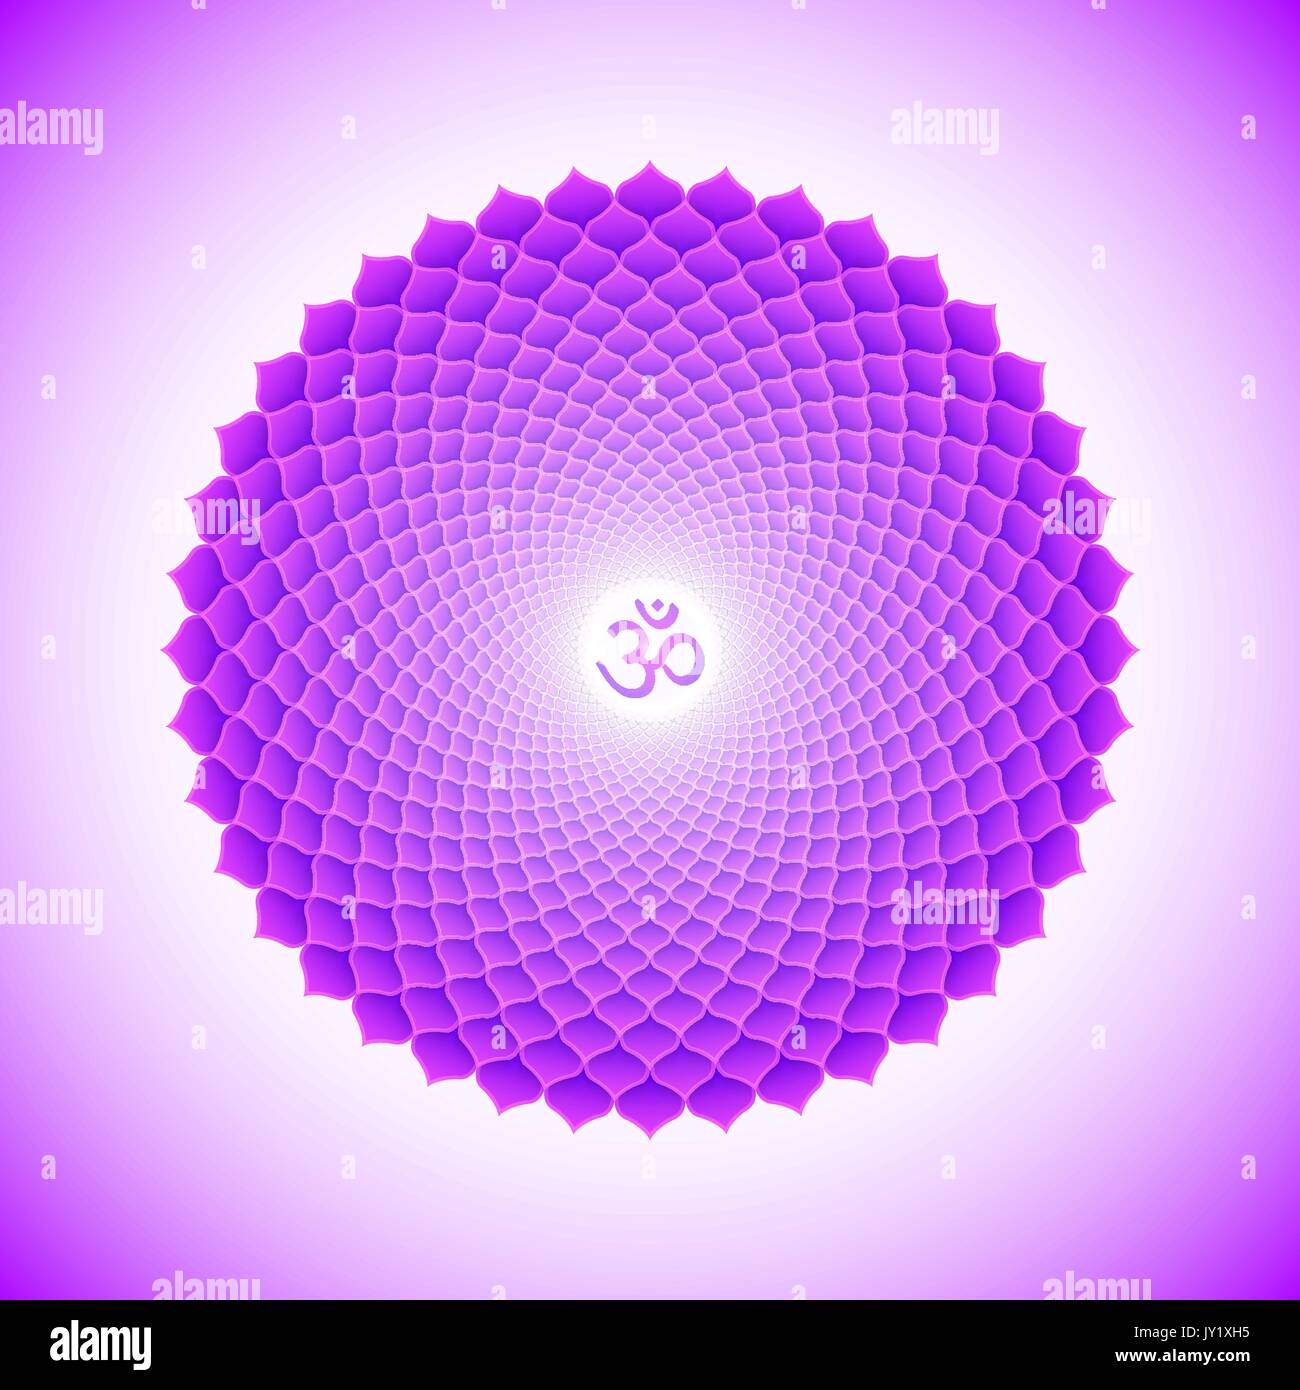 Vector seventh crown Sahasrara one thousand petals lotus chakra with hinduism sanskrit seed mantra Om. Flat style violet volumetric symbol with colore Stock Vector